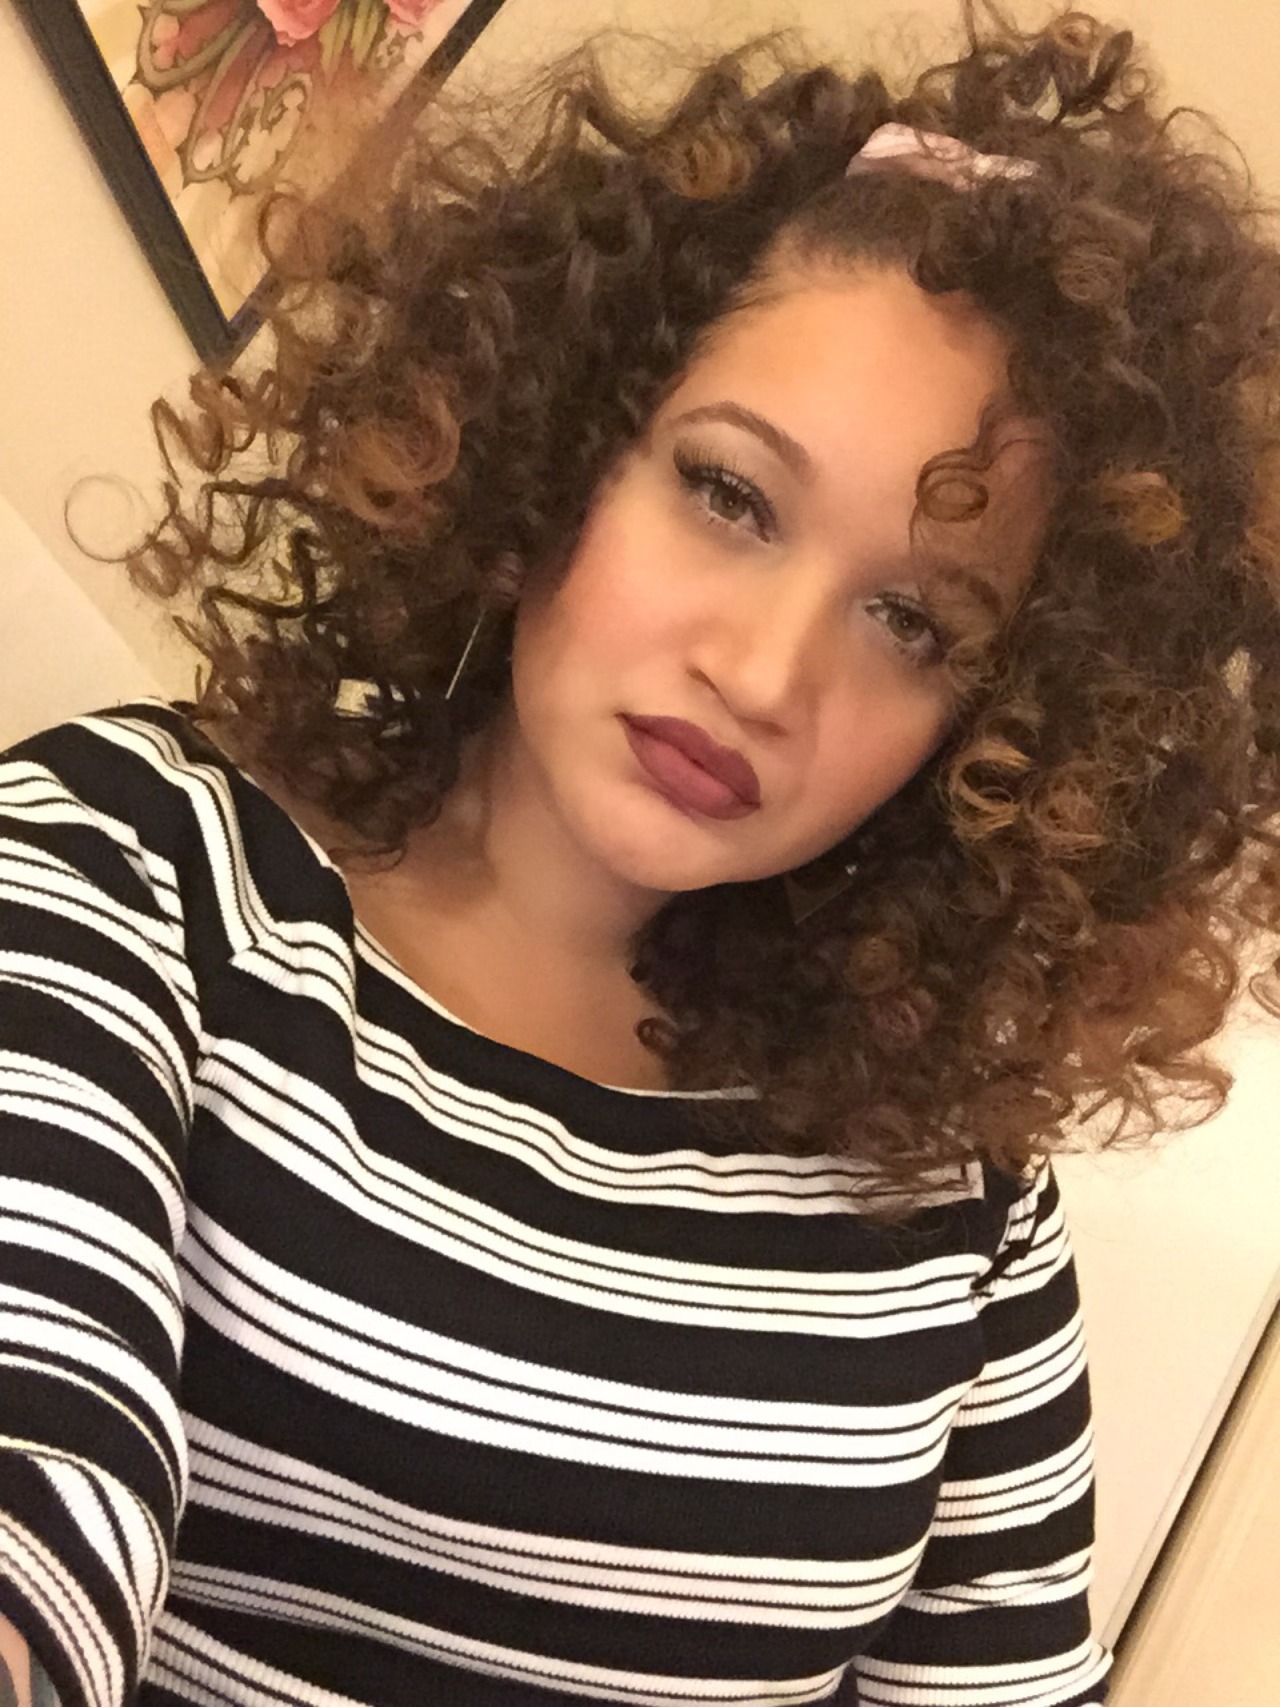 exoticplusmodel:  Curly hair 😍😍😍 I’m so mixed up sheesh  Wanna know what